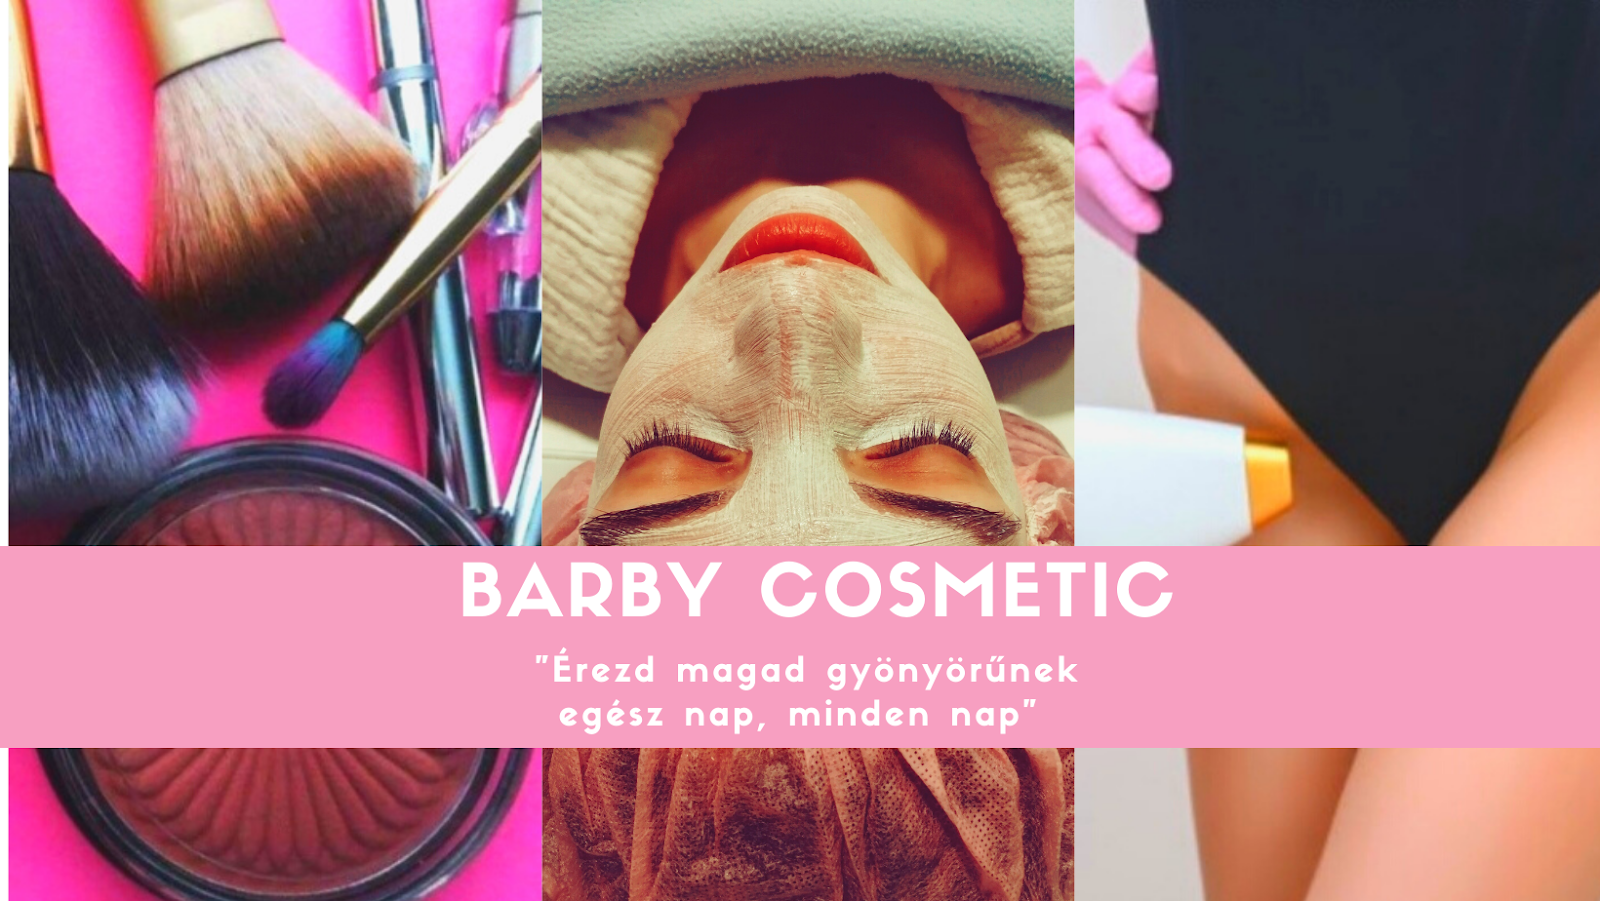 Barby Cosmetic